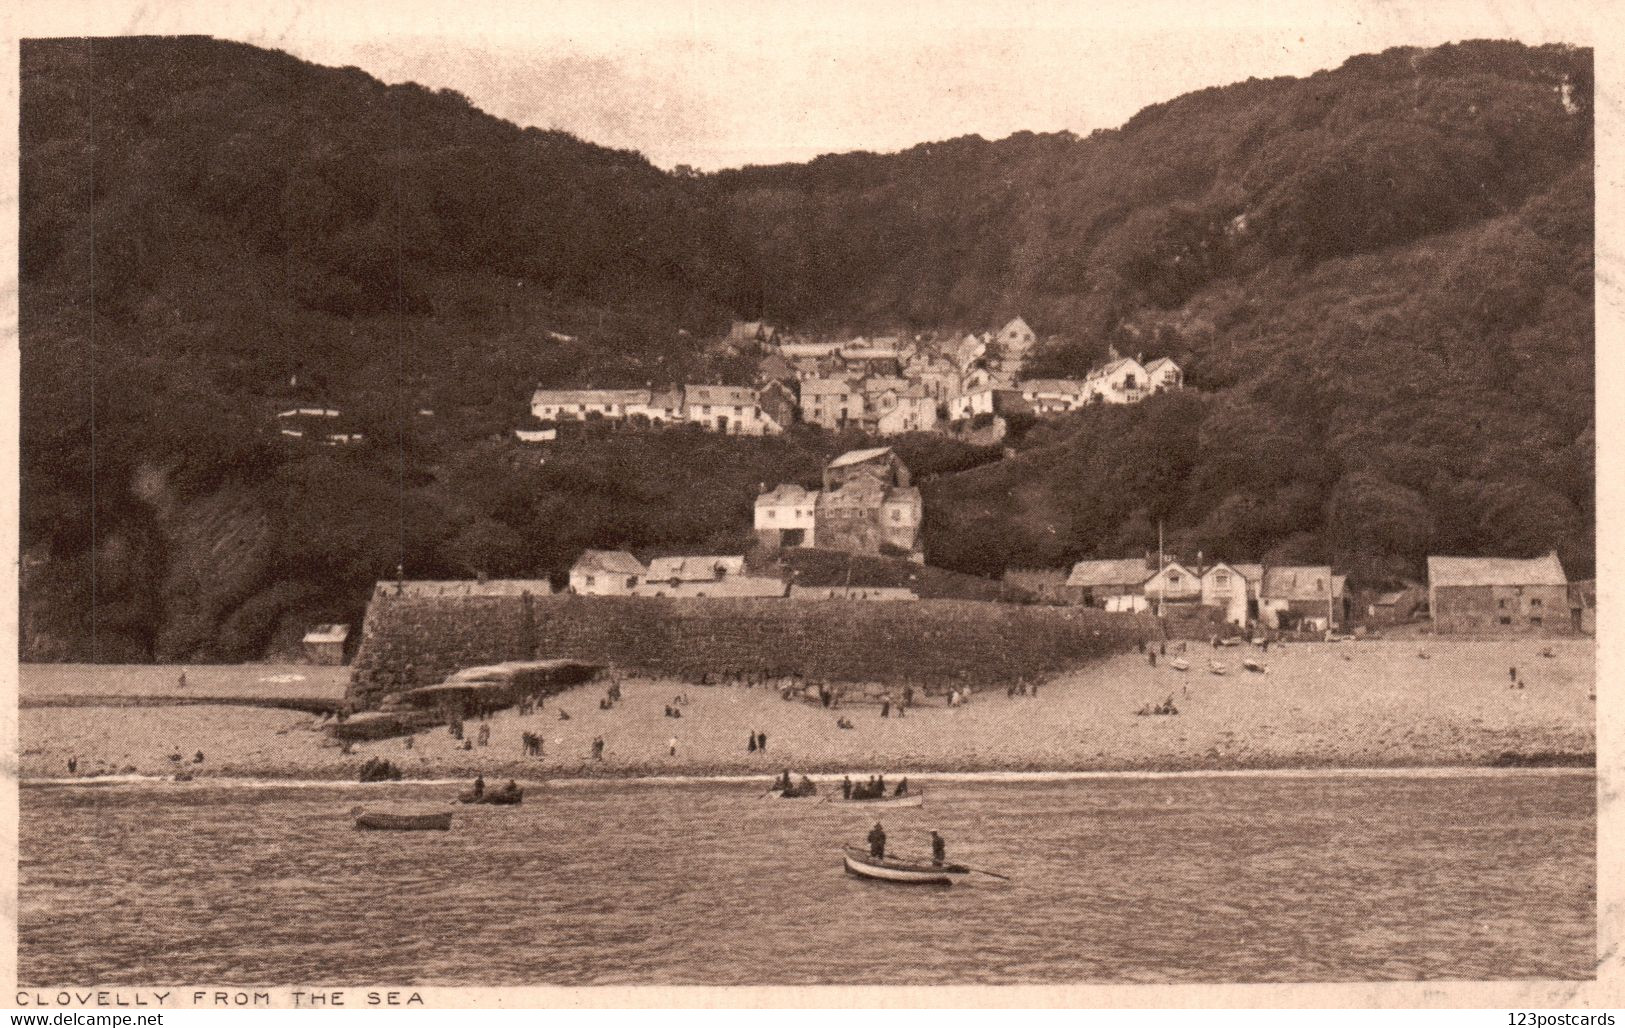 UK - Clovelly From The Sea - RARE! - Clovelly